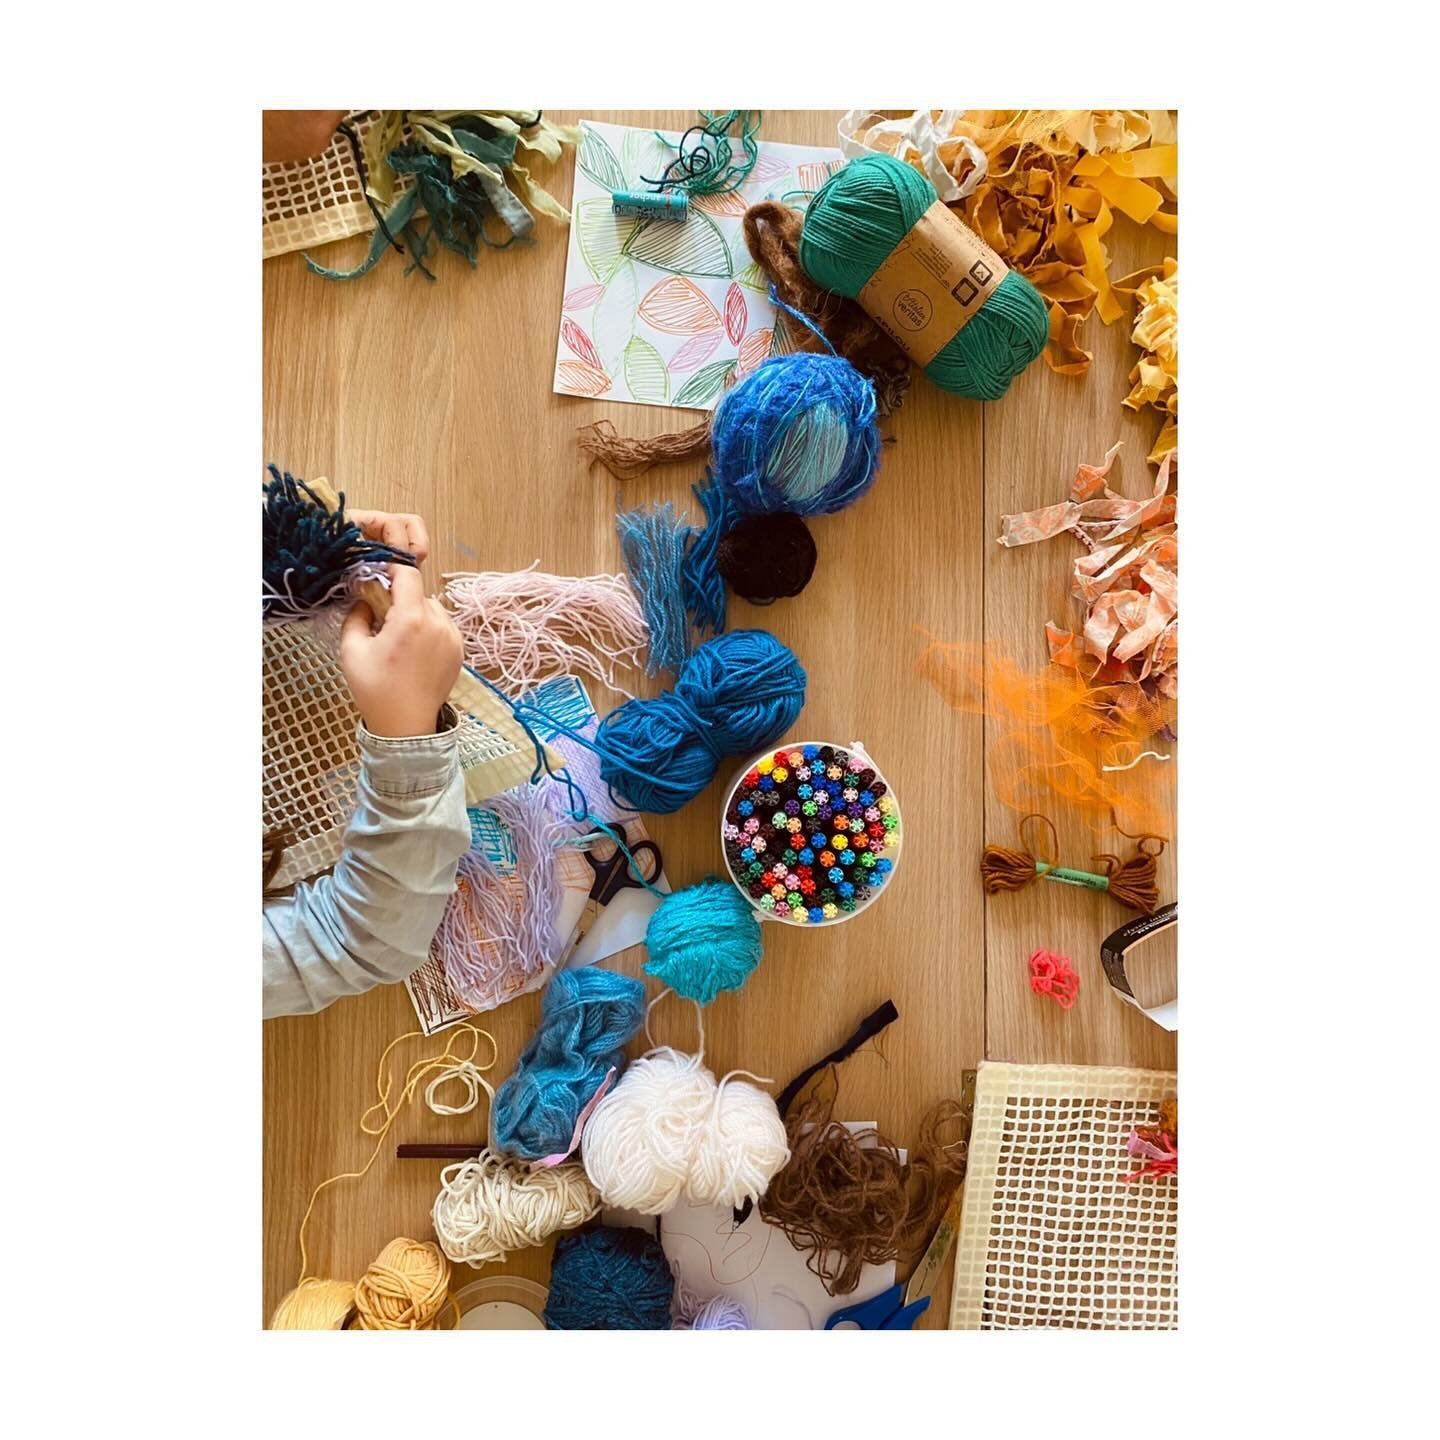 Last week was a parent/child workshop at @robinhook_brussels 😍
The sun was out and the creations were ultra colourful 🌈, created with yarns, wools, ribbons and recycled fabrics! Thanks to the really motivated children and their super mums 🤩